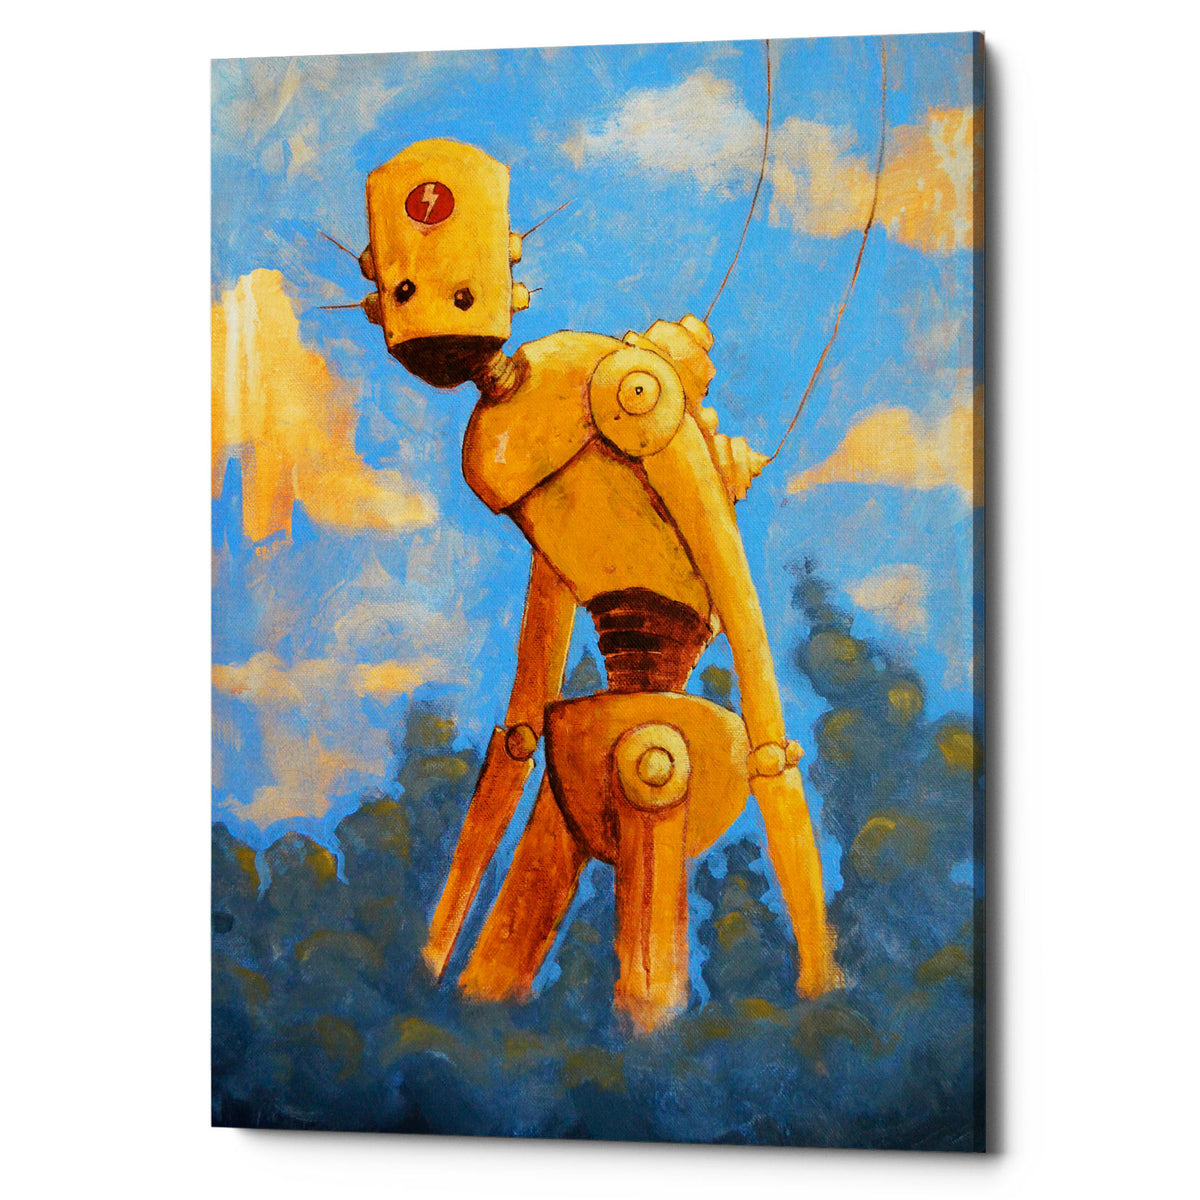 Epic Graffiti &quot;In The Clouds&quot; by Craig Snodgrass, Giclee Canvas Wall Art